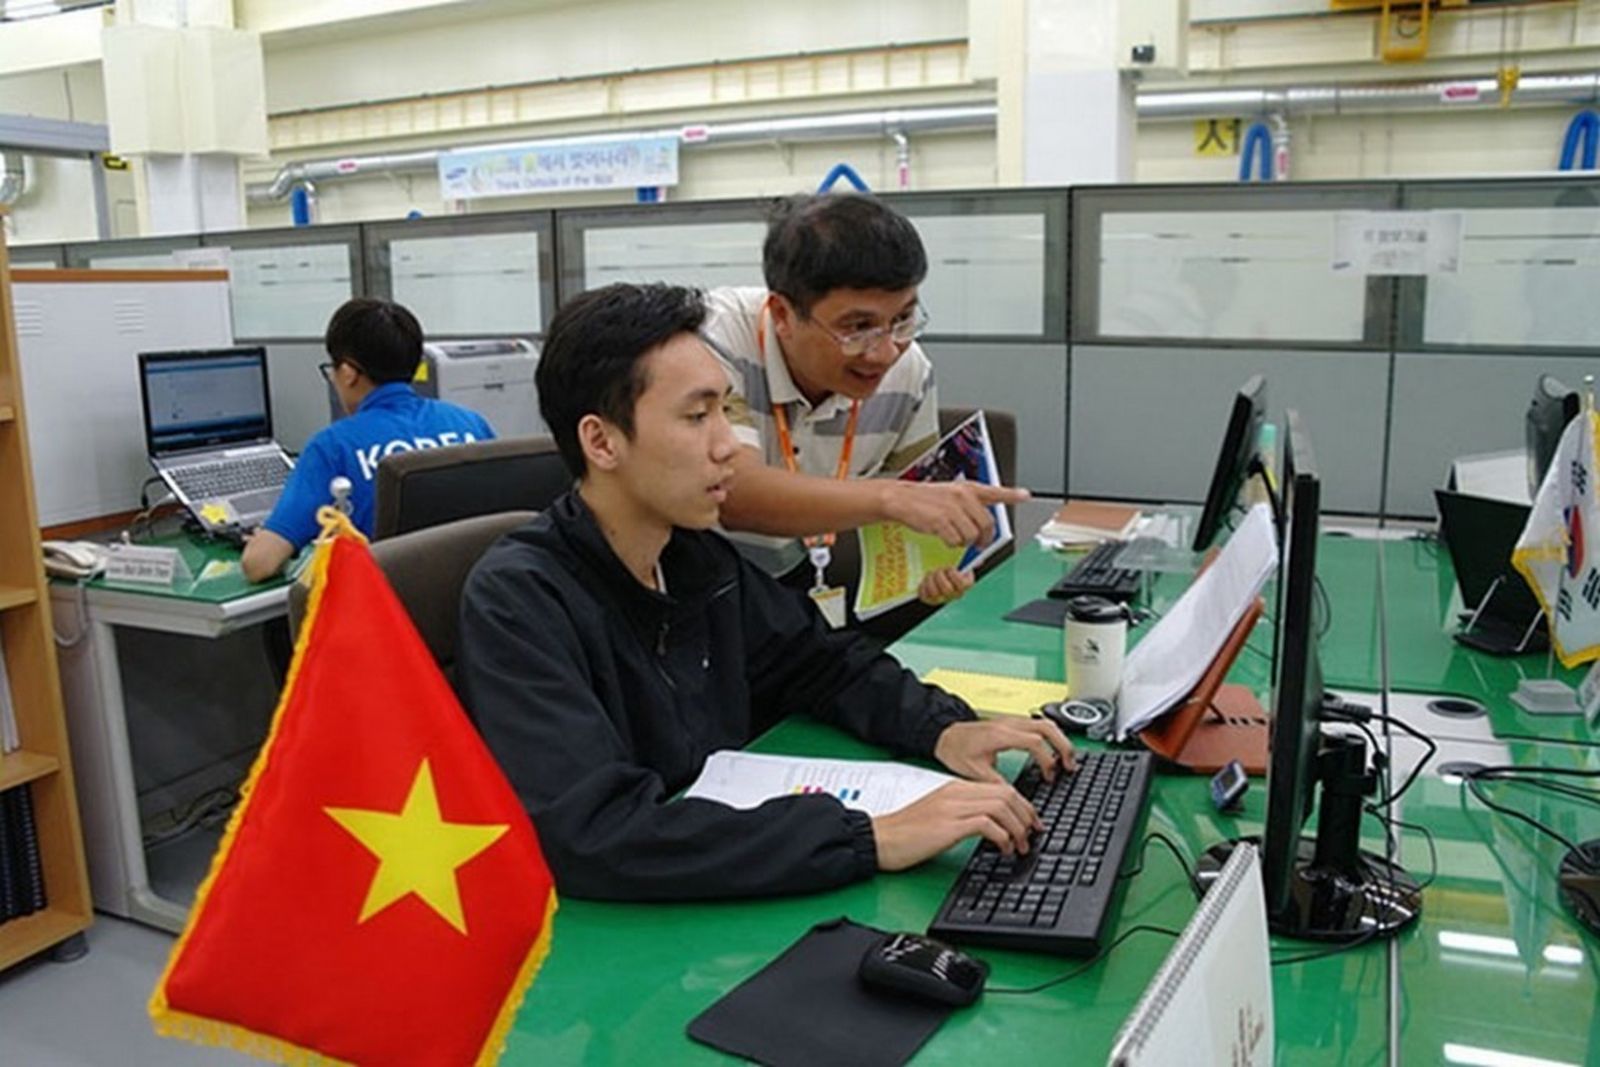 Vietnam Comparable With Countries In Skills And Technology Development